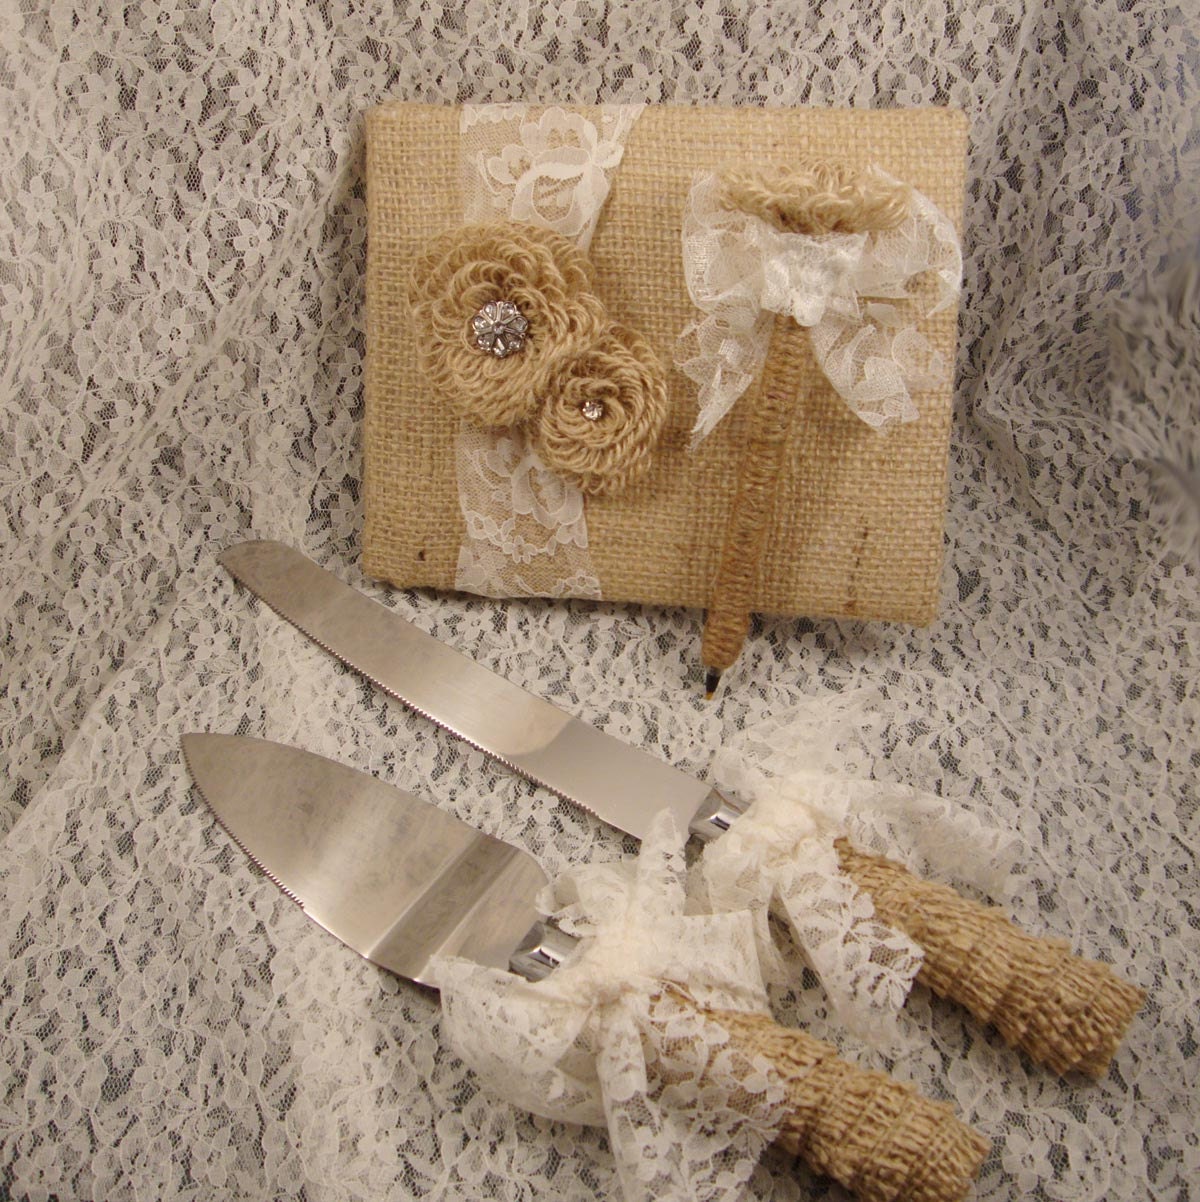 Rustic Burlap Wedding Cake Servers and Guest Book Pen Set From ORomeo